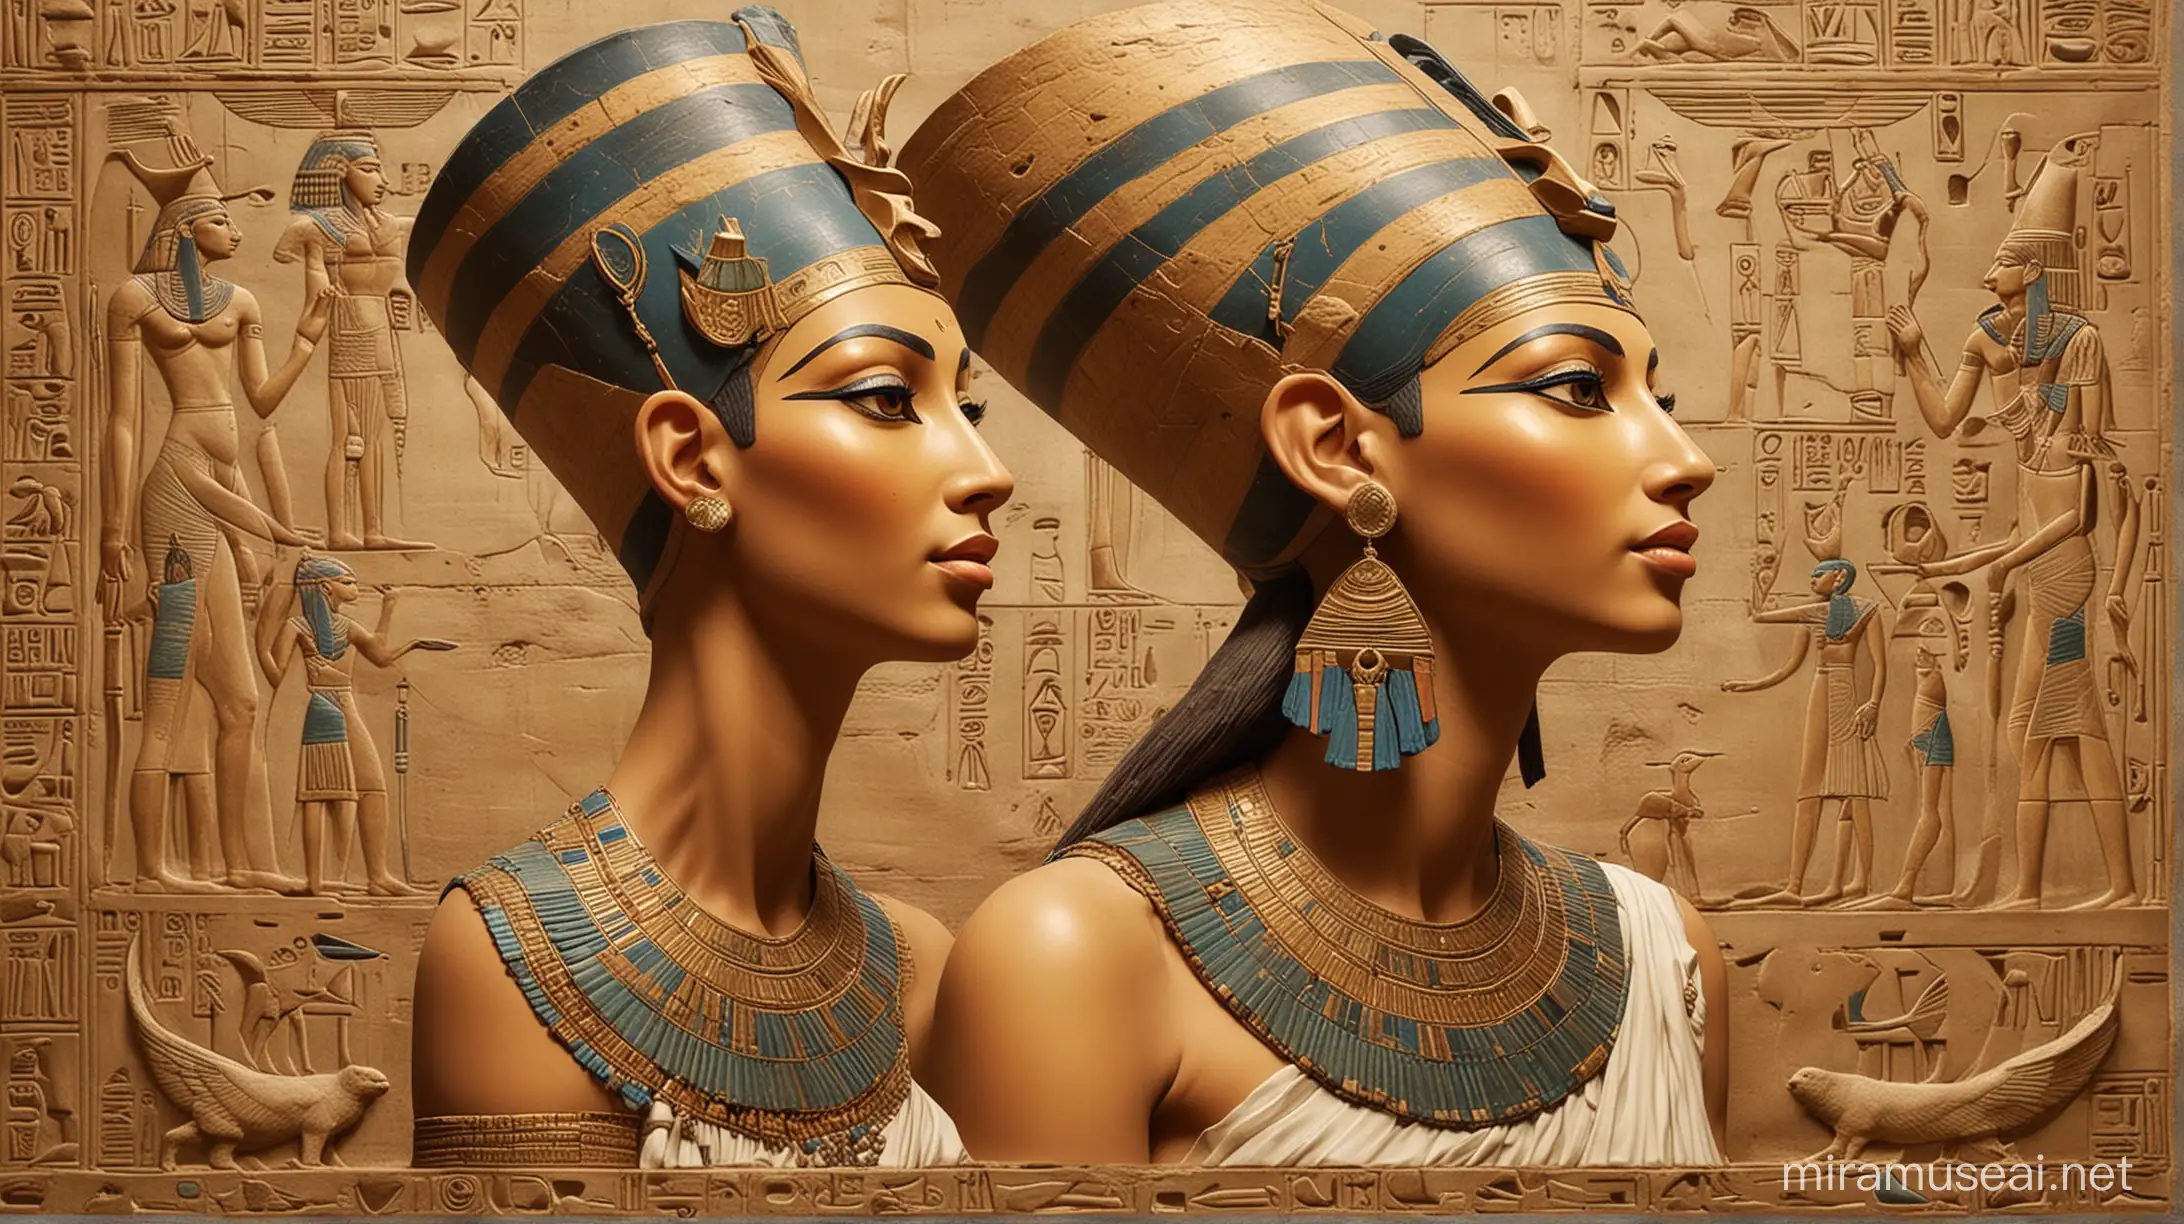 Begin with an eye-catching depiction of Ancient Egypt, featuring iconic symbols like pyramids, hieroglyphs, and the Nile River to set the historical context.

Highlight Cleopatra with an image that portrays her regal demeanor and incorporates elements of Egyptian and Roman culture, such as her wearing traditional Egyptian attire adorned with Roman symbols like laurel wreaths.

Represent Nefertiti with an artistic rendering that captures her renowned beauty and grace, perhaps featuring her iconic bust sculpture or images of her alongside Akhenaten during the Amarna period.

Include symbolic imagery related to Cleopatra's relationships with Julius Caesar and Mark Antony, such as Roman coins or depictions of famous historical events like the Battle of Actium.

Showcase Nefertiti's significance in the religious revolution of Ancient Egypt with imagery related to the worship of the sun god Aten, such as sun disks and representations of the Amarna temples.

Conclude the image with a call to action, encouraging viewers to explore more about Cleopatra and Nefertiti's legacies by subscribing to the channel for further historical content.